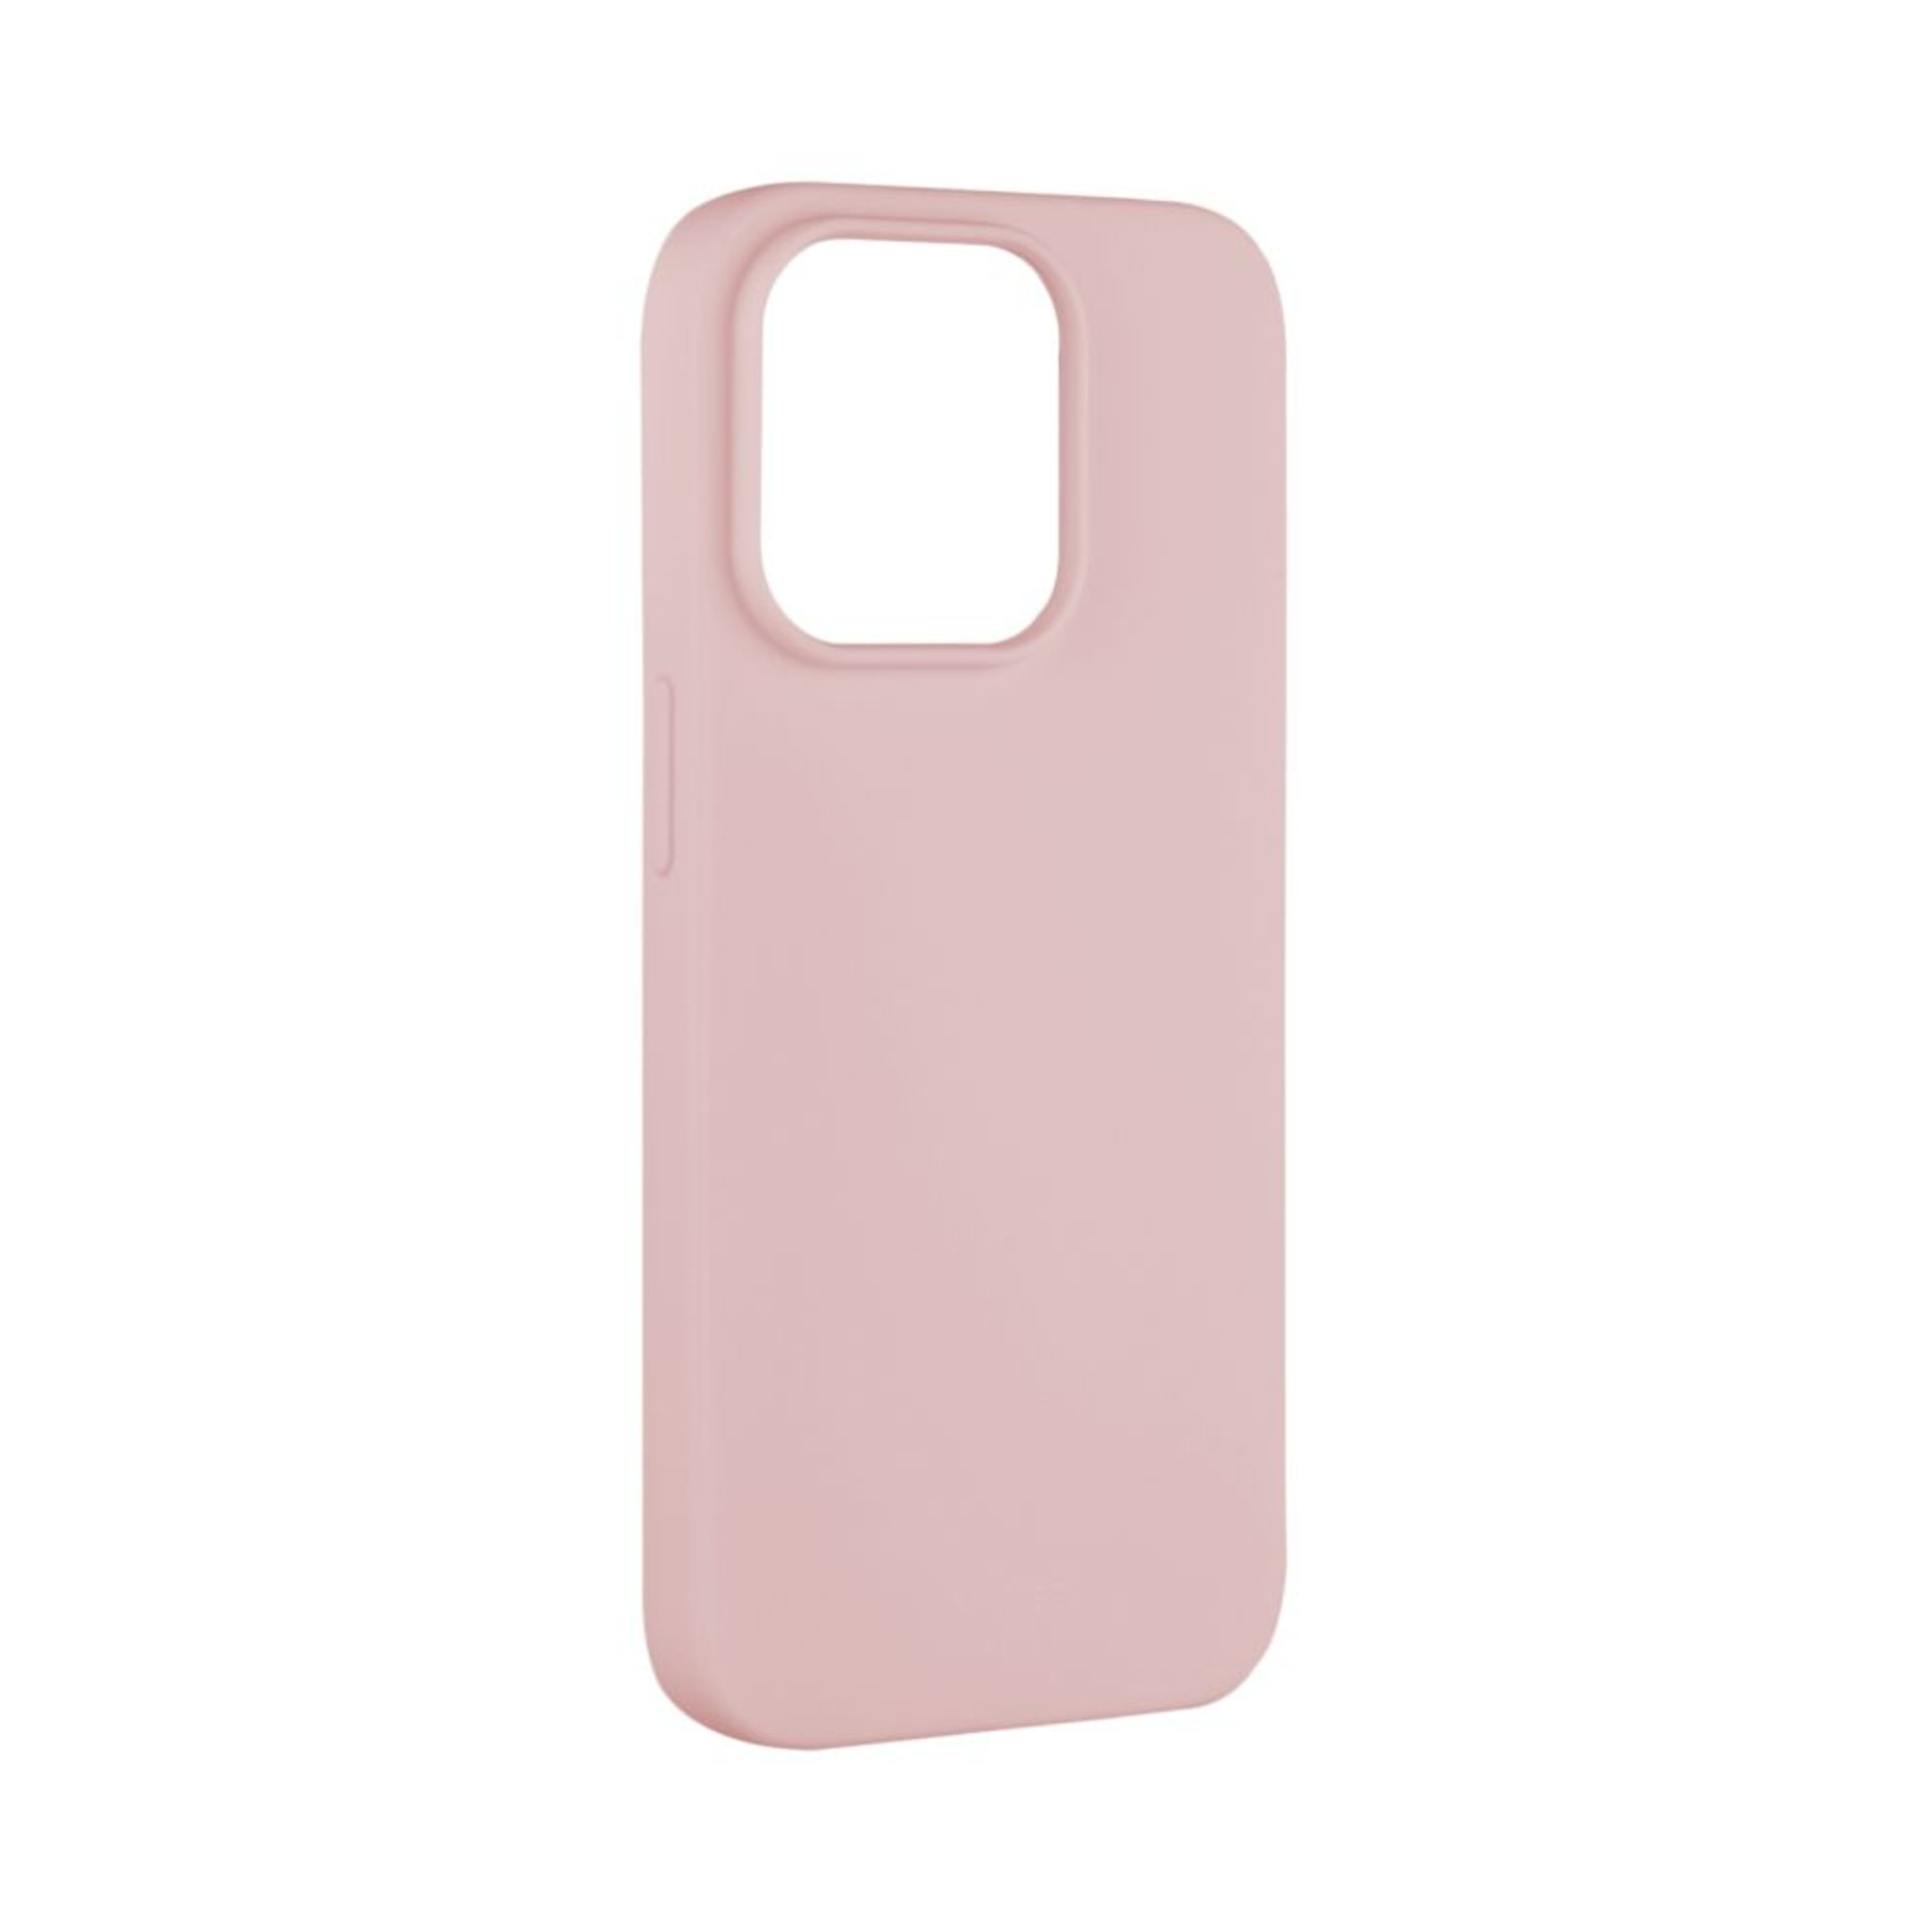 Pro Rosa Apple, Backcover, iPhone FIXED 14 Max, FIXST-931-PK,